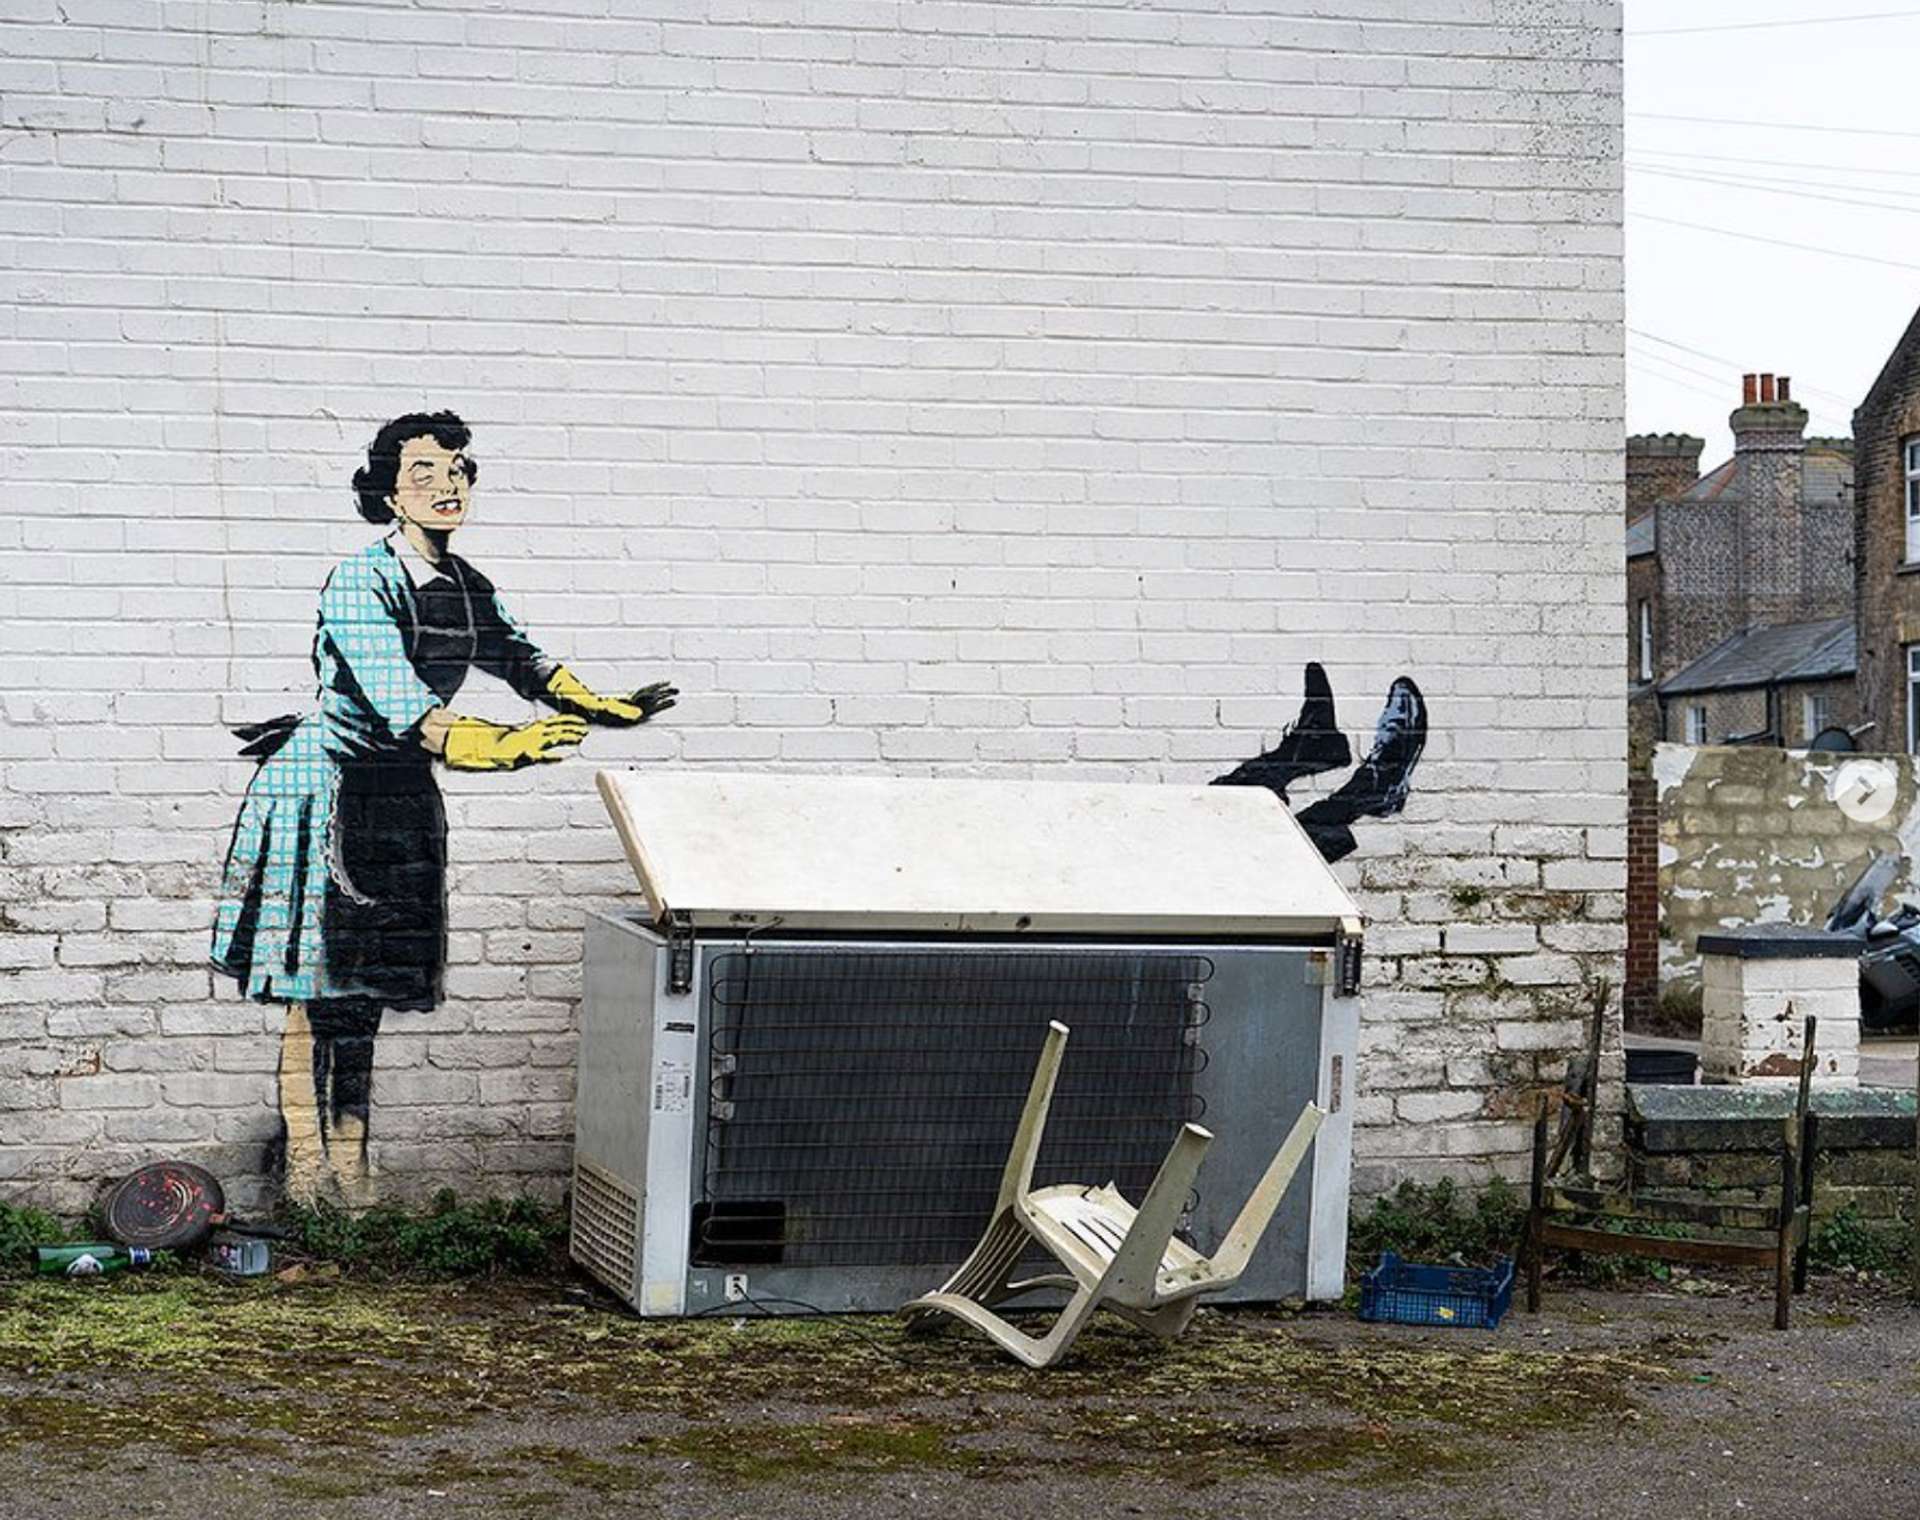 This image shows a graffiti of woman, wearing bright yellow dish washing gloves, seemingly closing the lid on a real discarded freezer, from which a pair of feet in male shoes emerges. The woman has a black eye and a swollen cheek, and is missing a tooth.